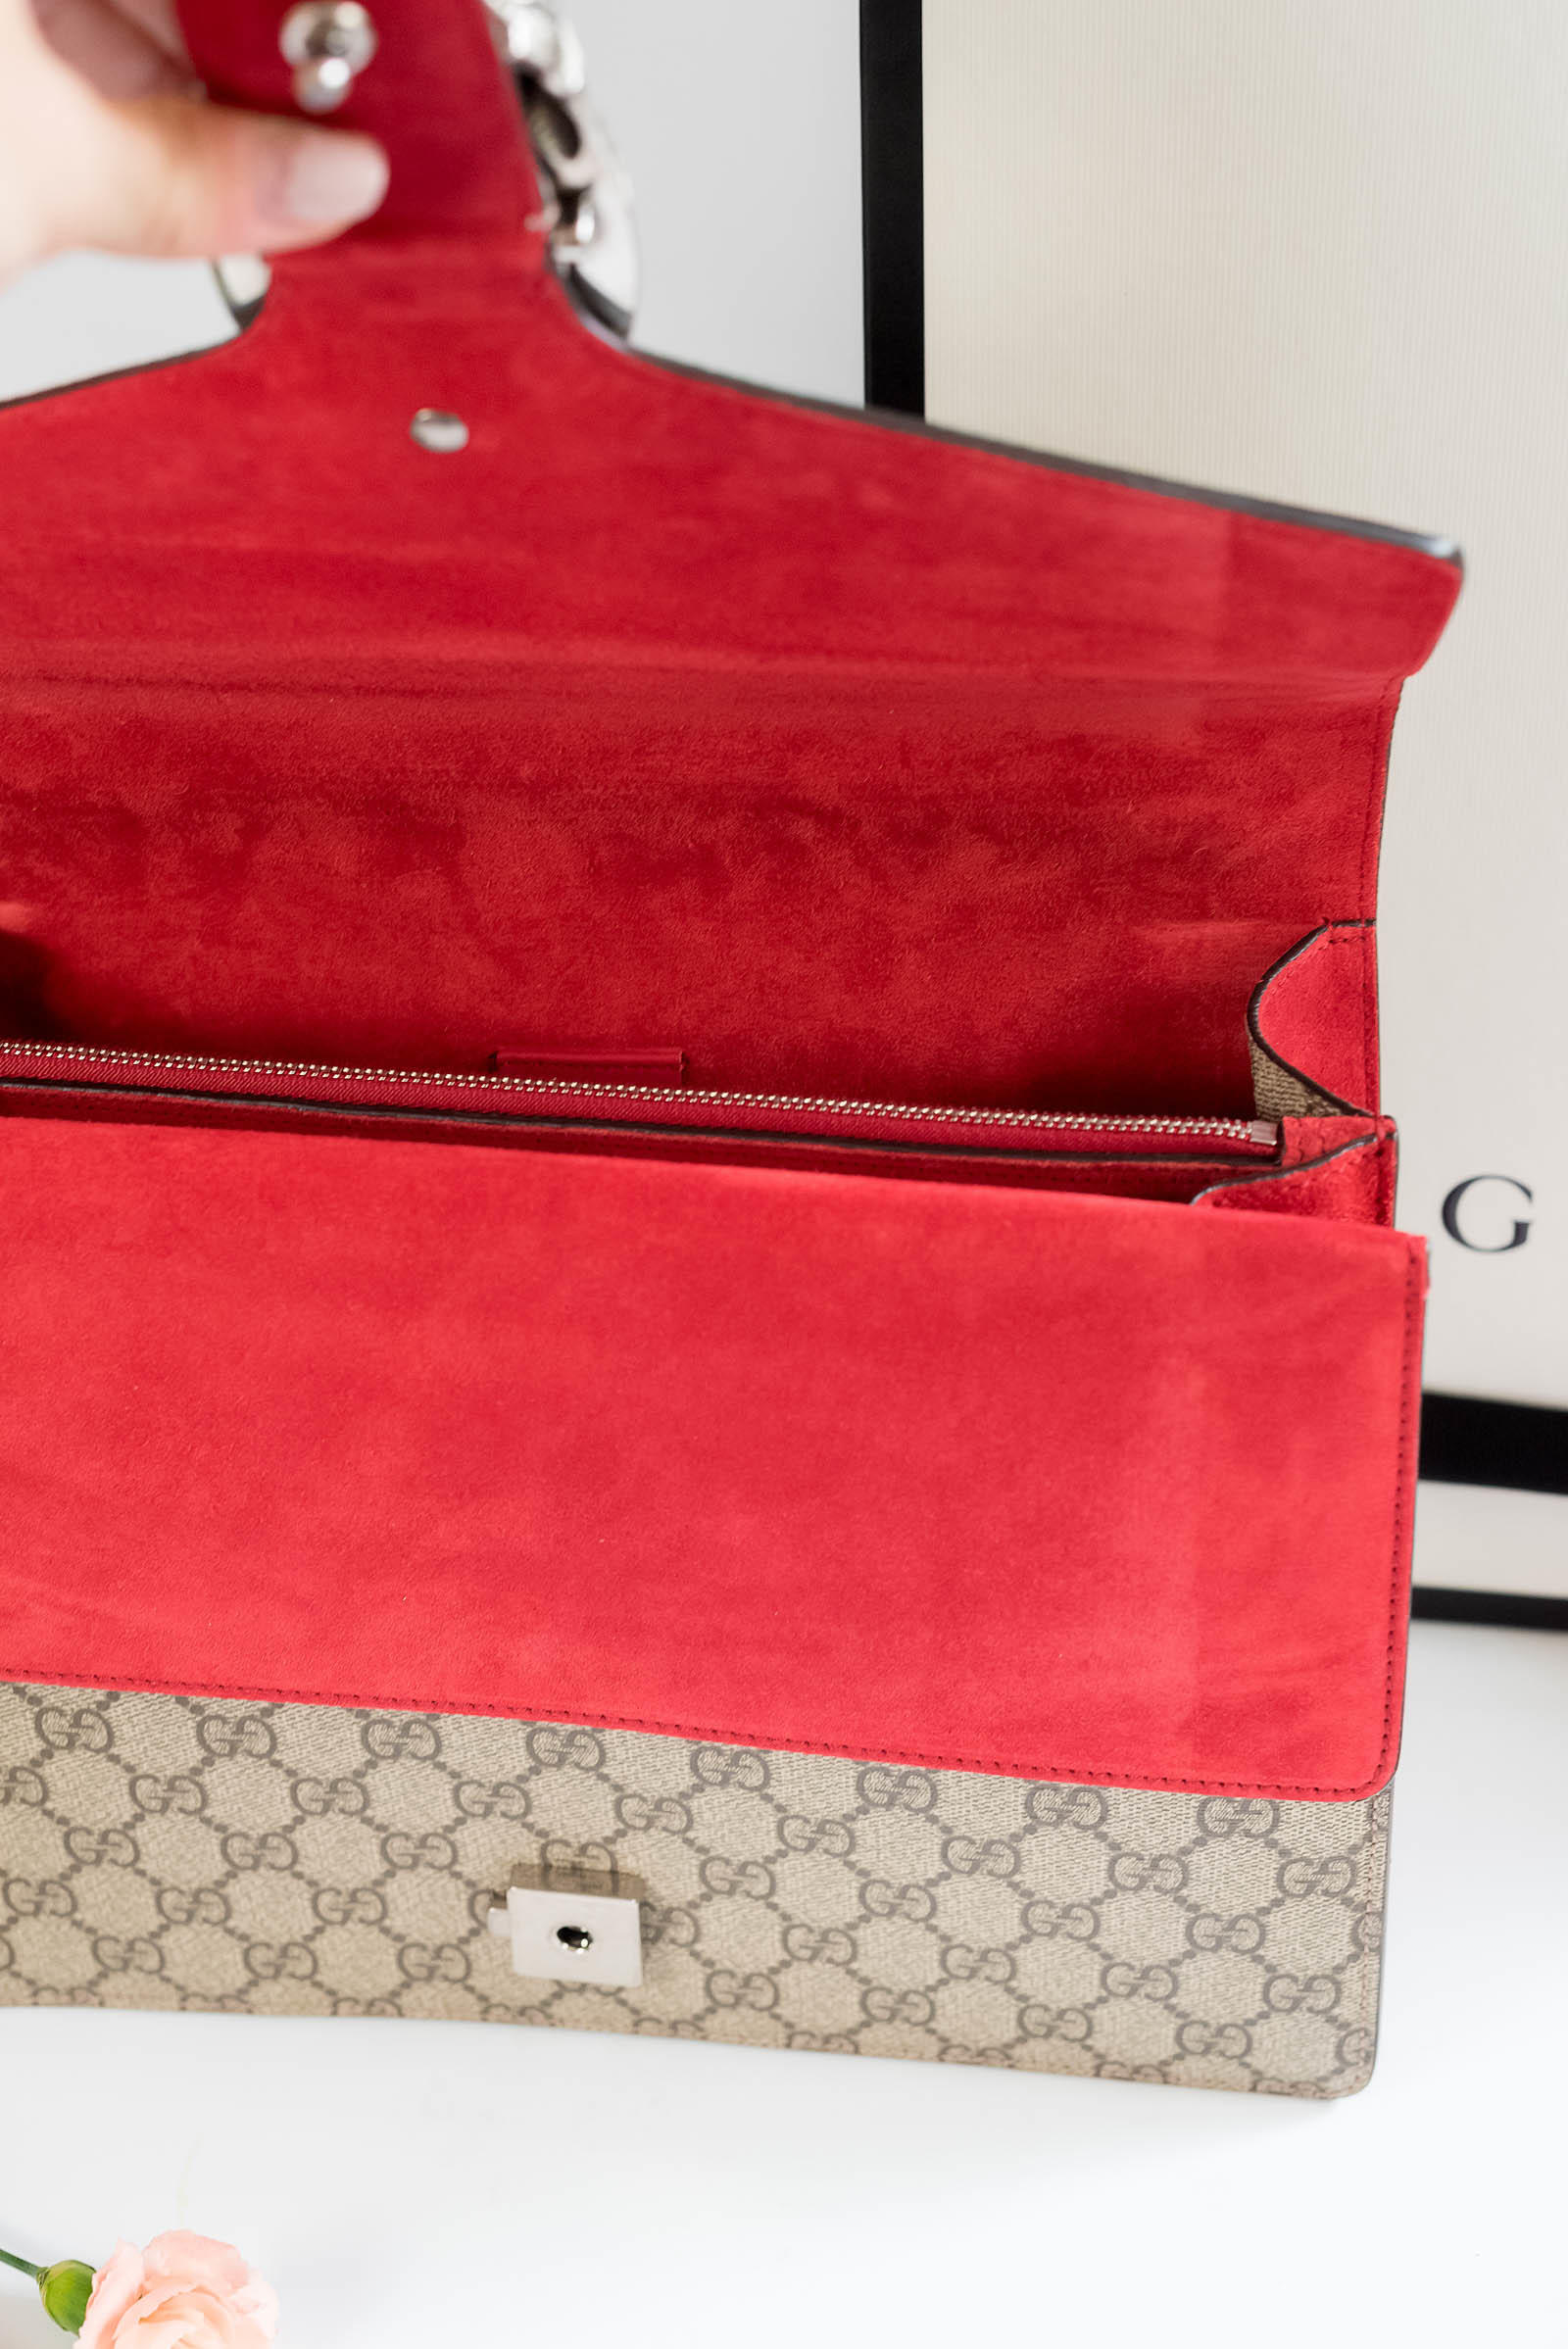 What To Know About Gucci's Dionysus Bag: History, Inspiration, & More